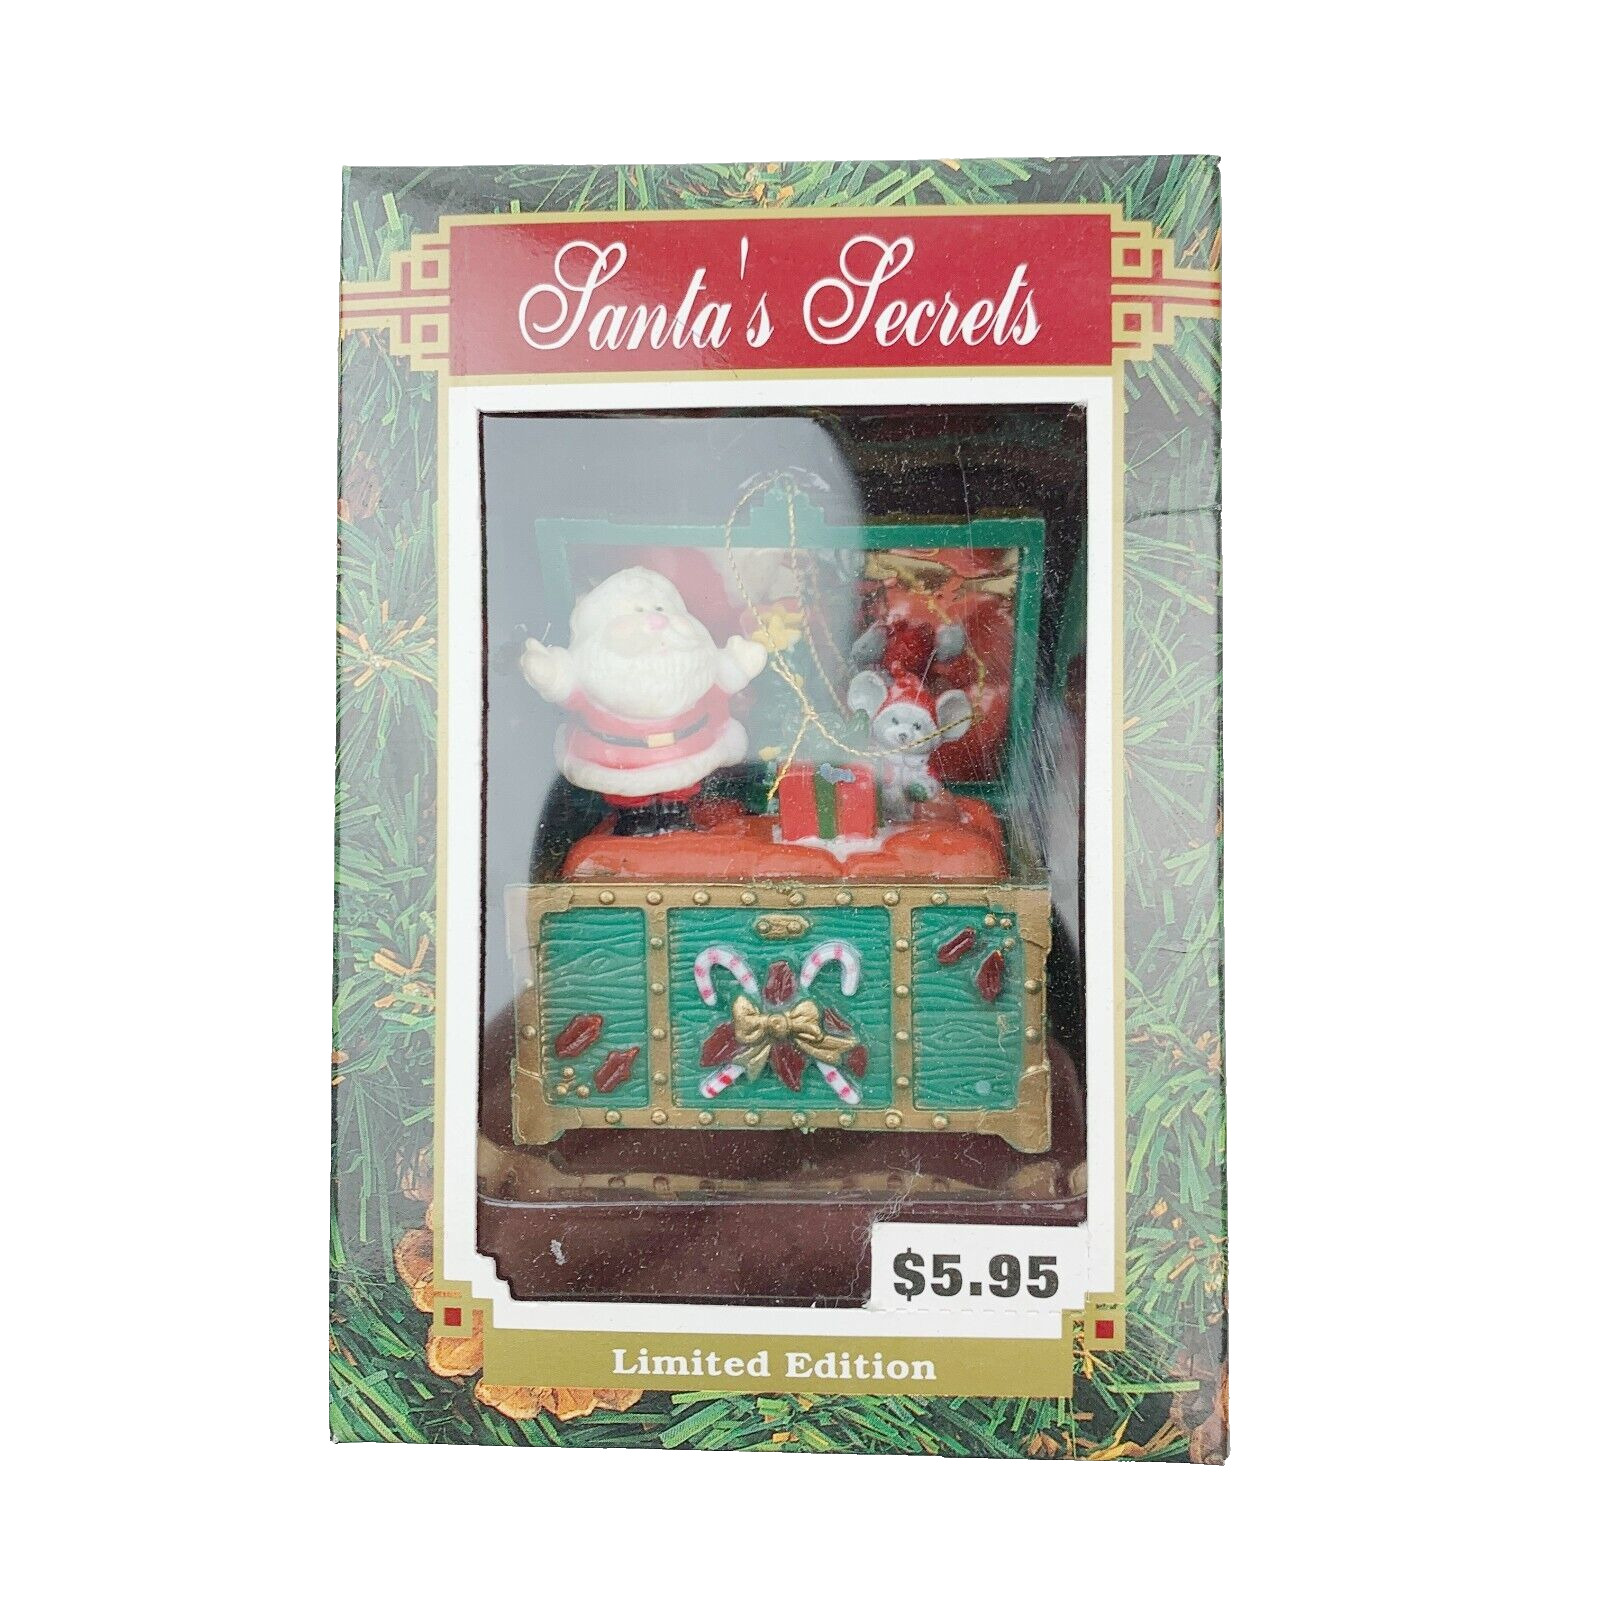 Vintage Santa's Secrets Toy Chest Handcrafted Christmas Ornament New